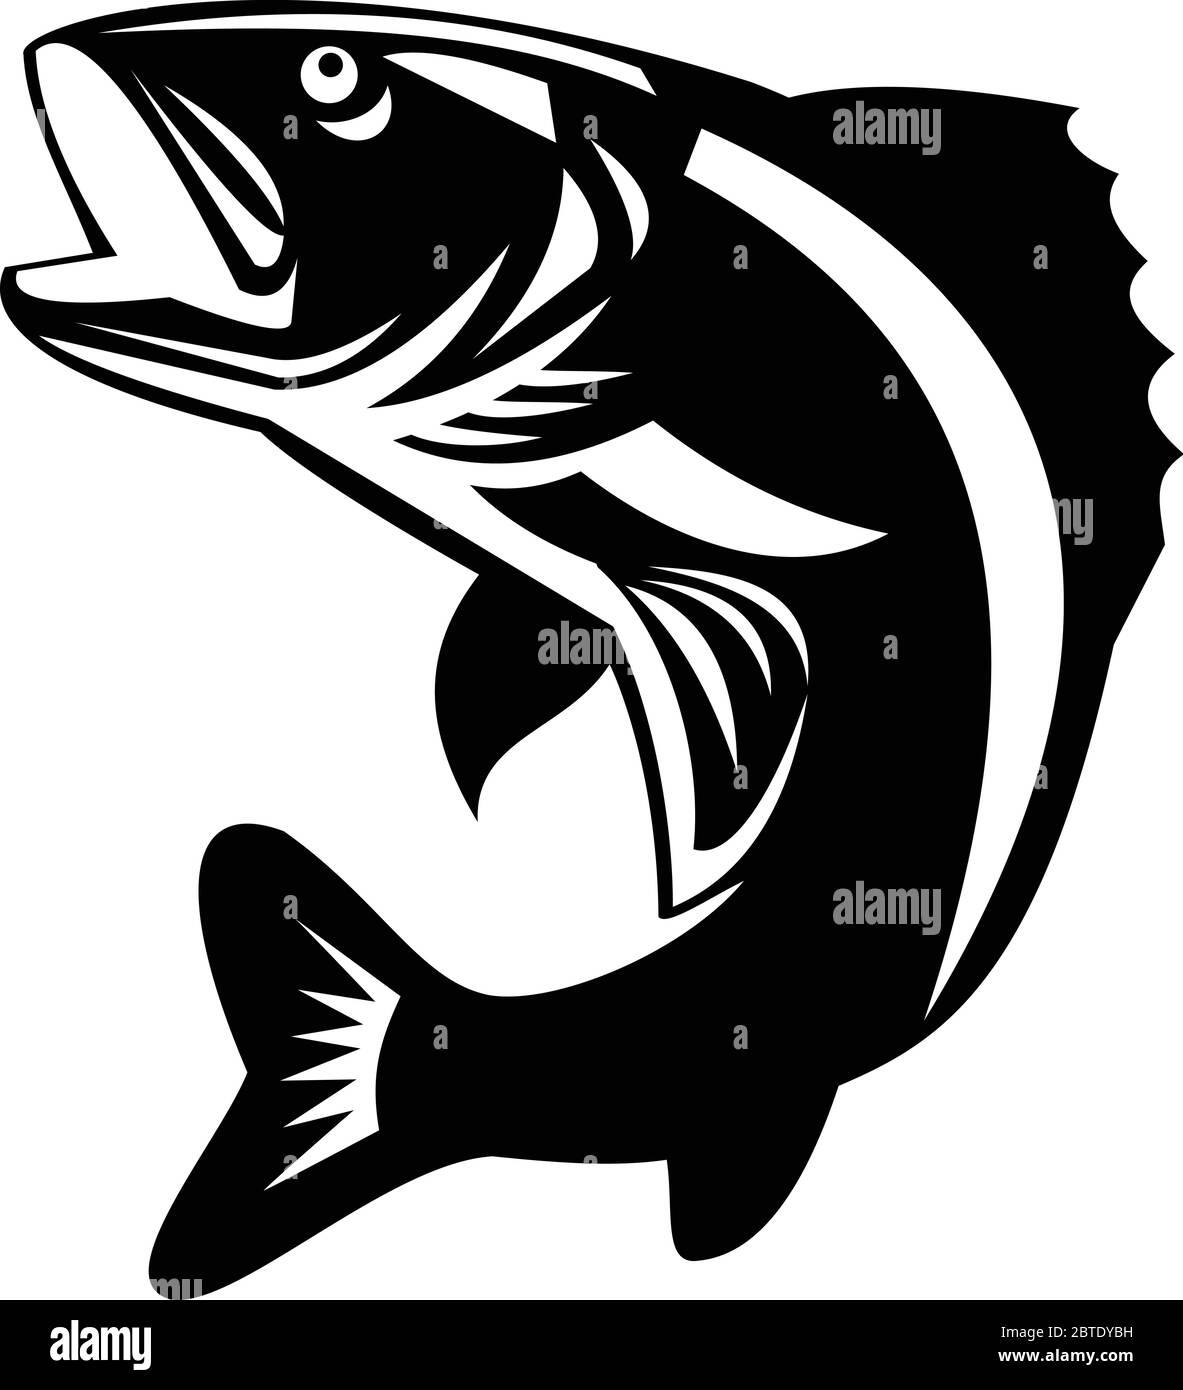 Black and White Illustration of a Walleye (Sander vitreus, formerly Stizostedion vitreum), a freshwater perciform fish jumping up  viewed from the sid Stock Vector